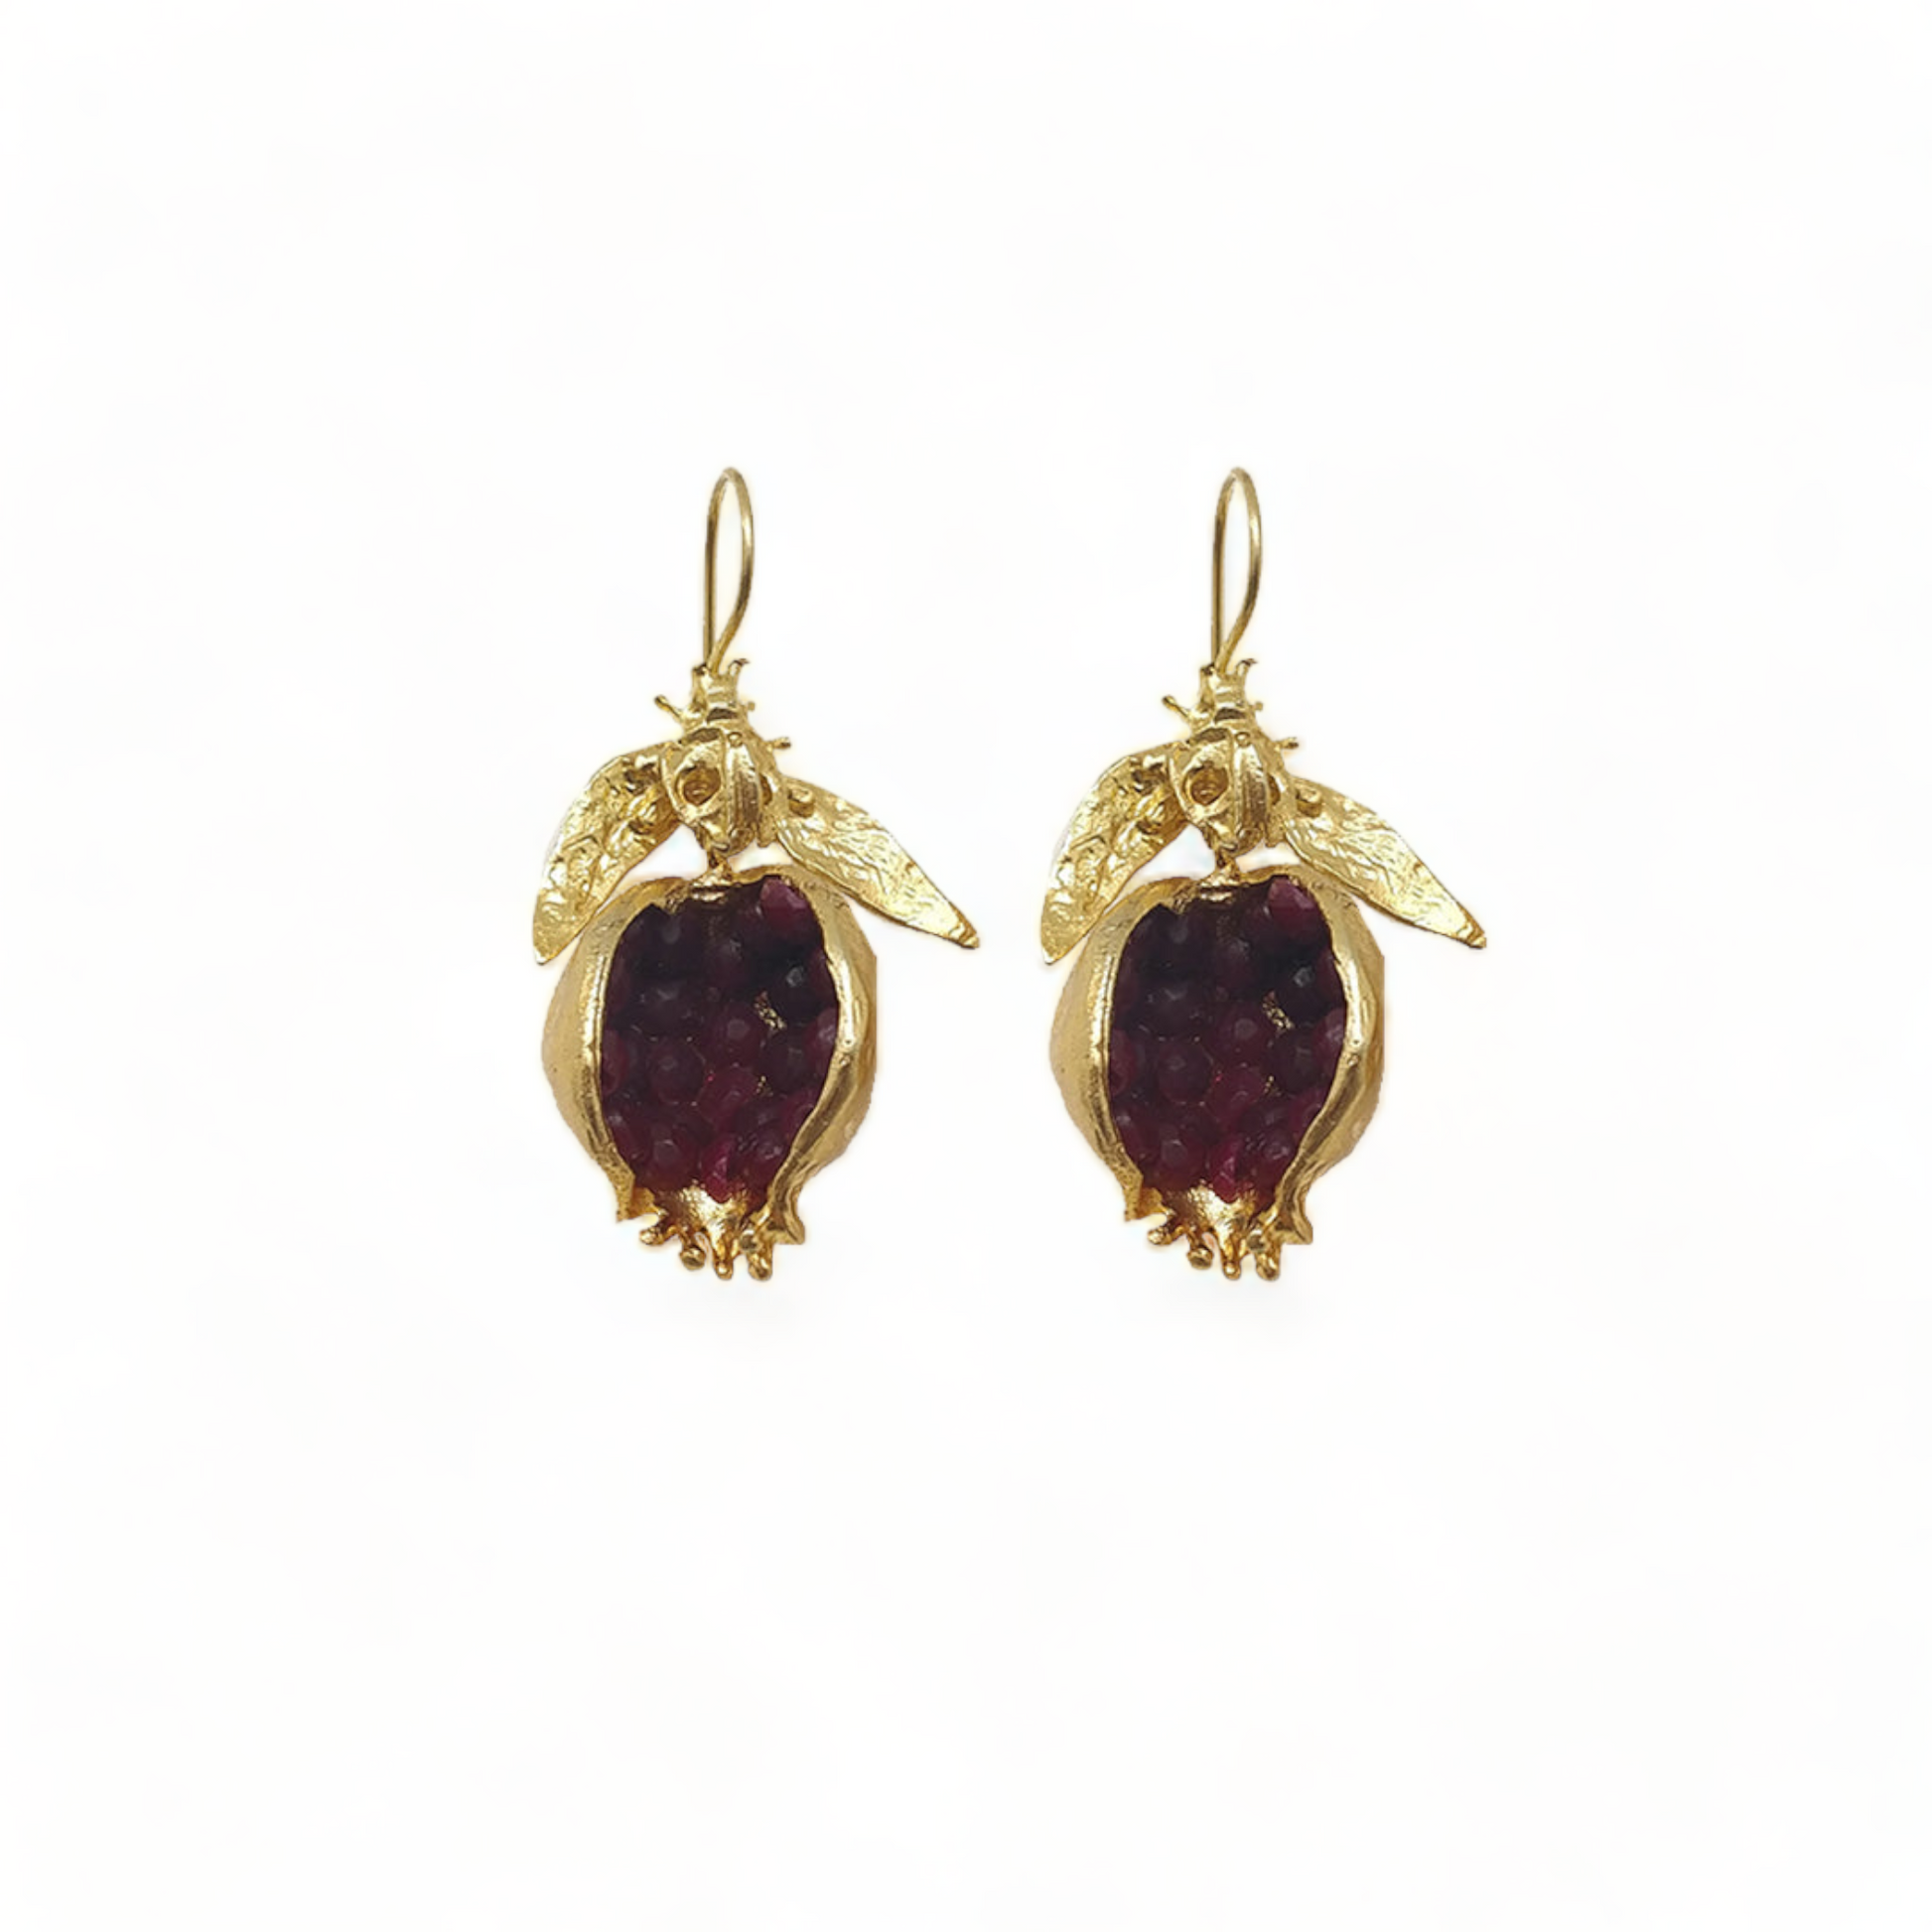 Contemporary Handmade Red Pomegranate Earrings | Gold-Plated with Red Ruby CZ Accents - shopzeyzey